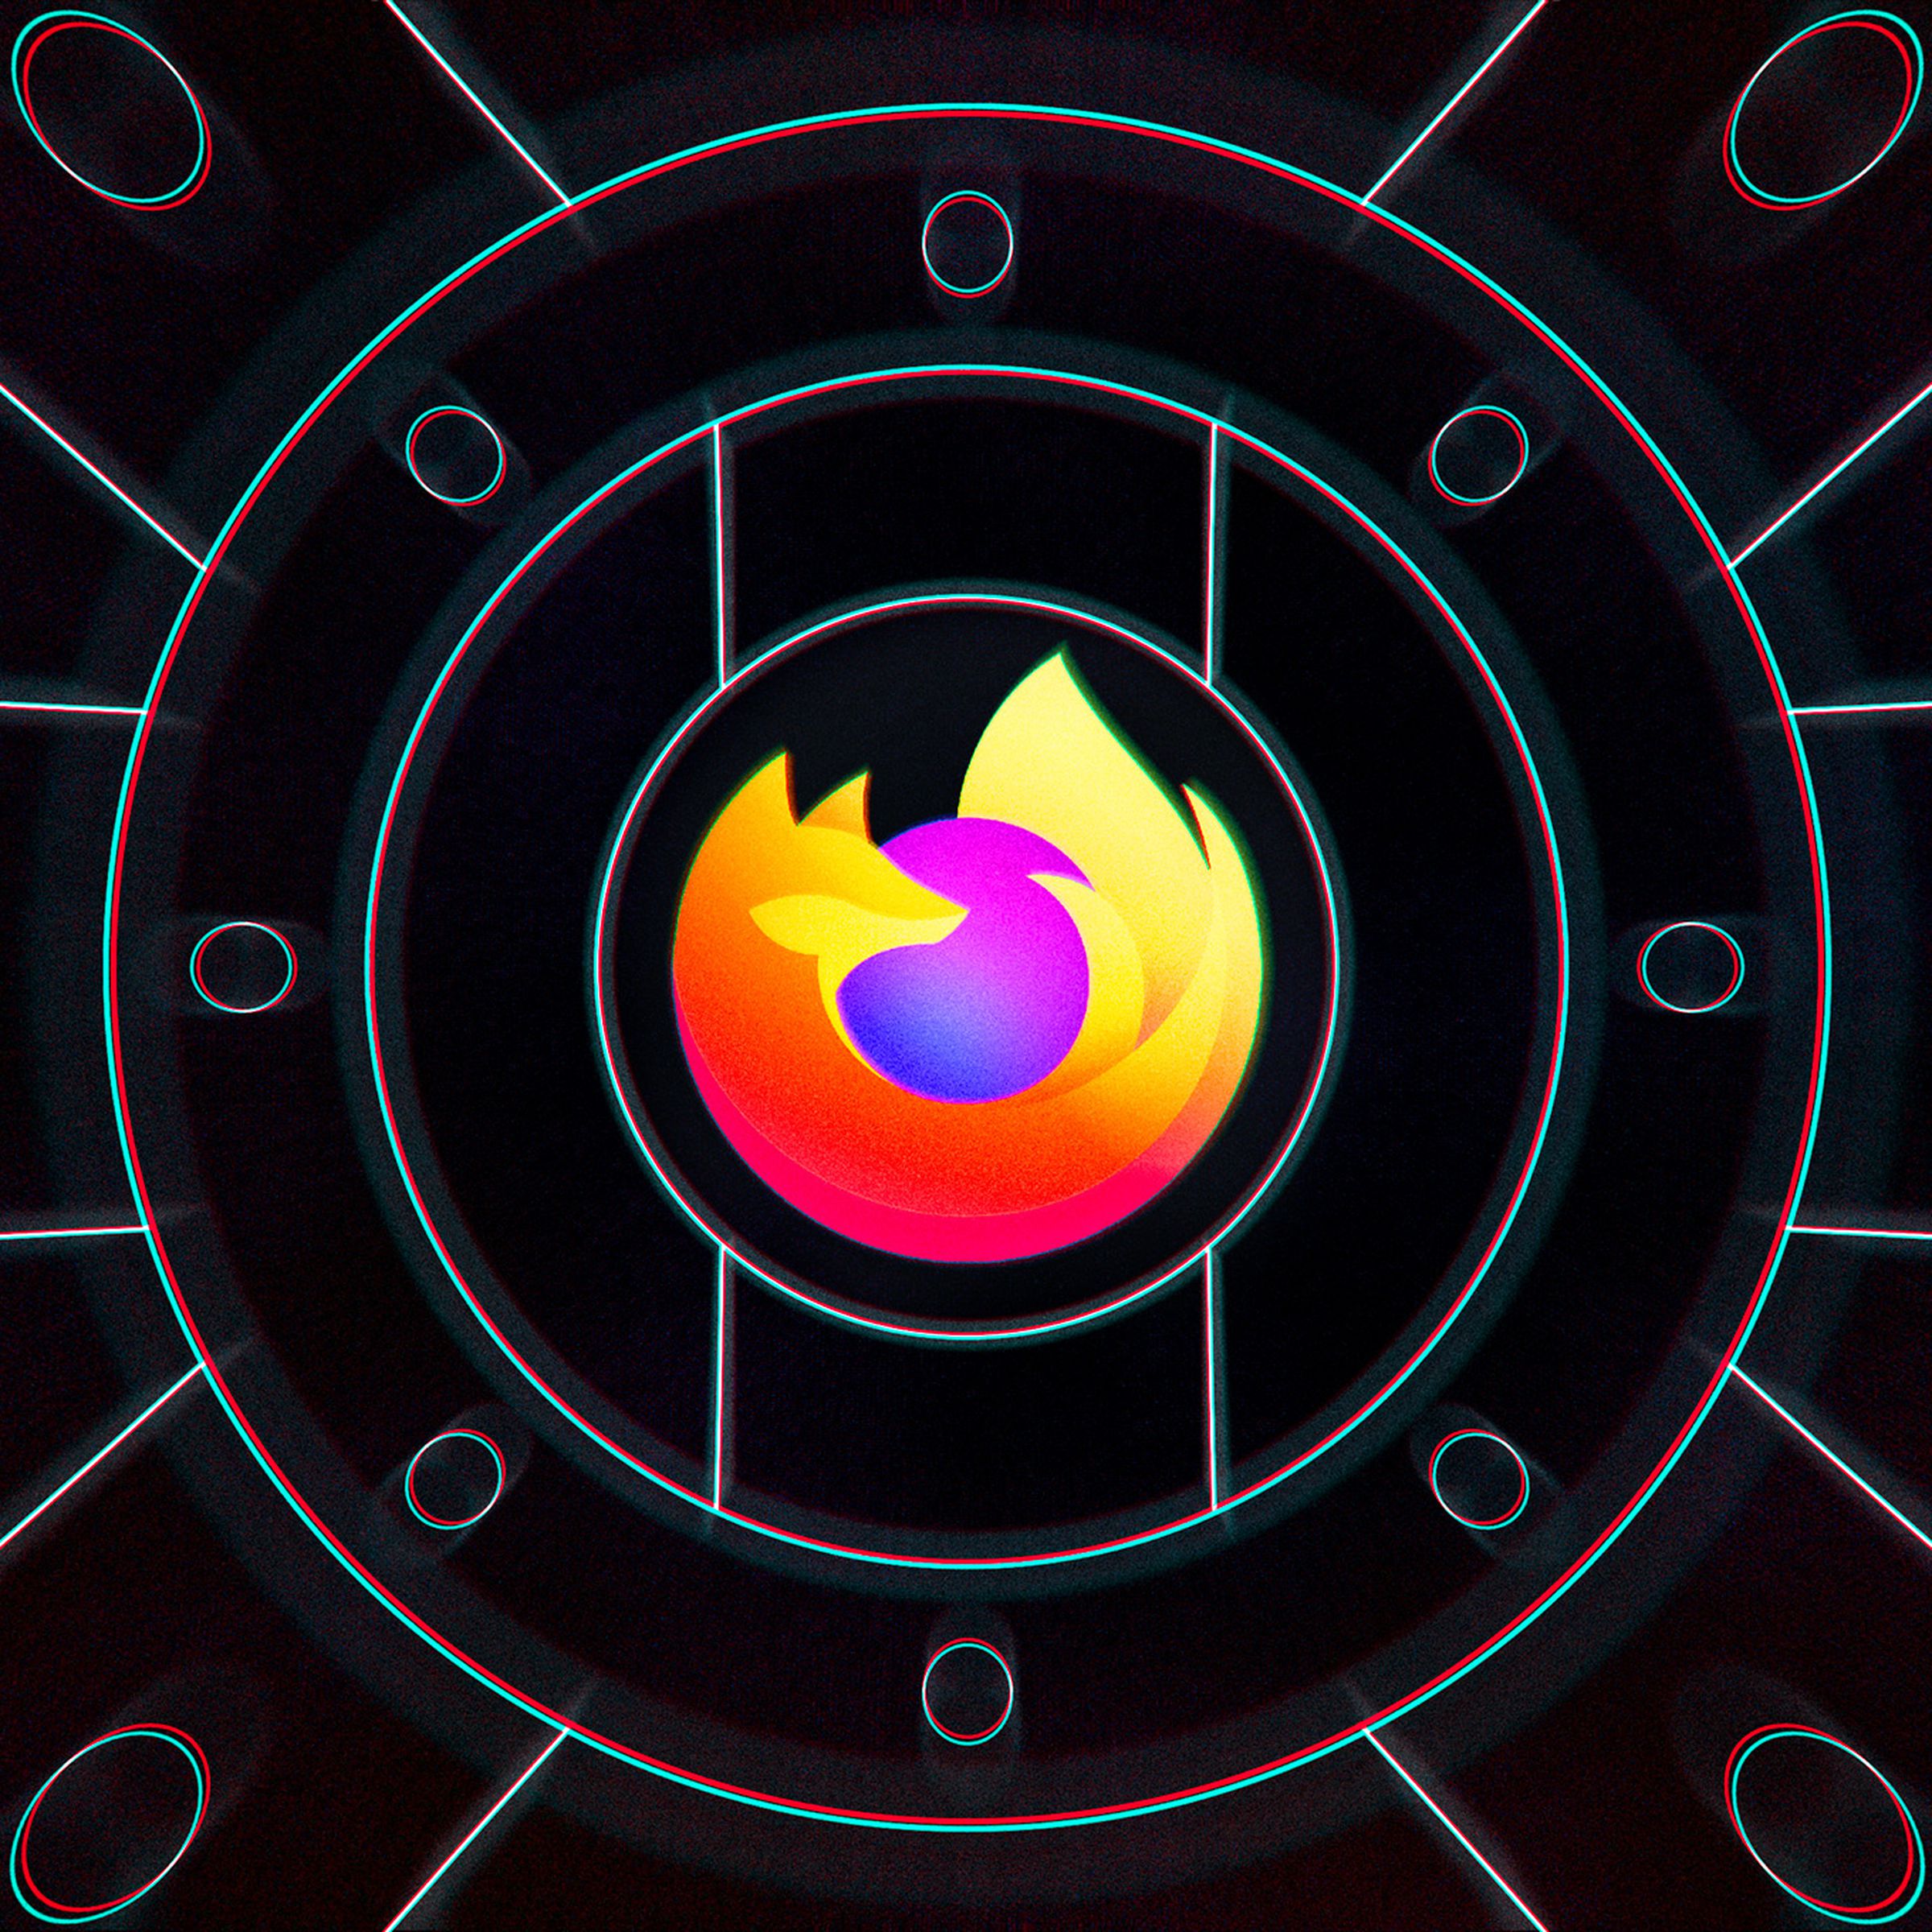 The Firefox logo on a black background